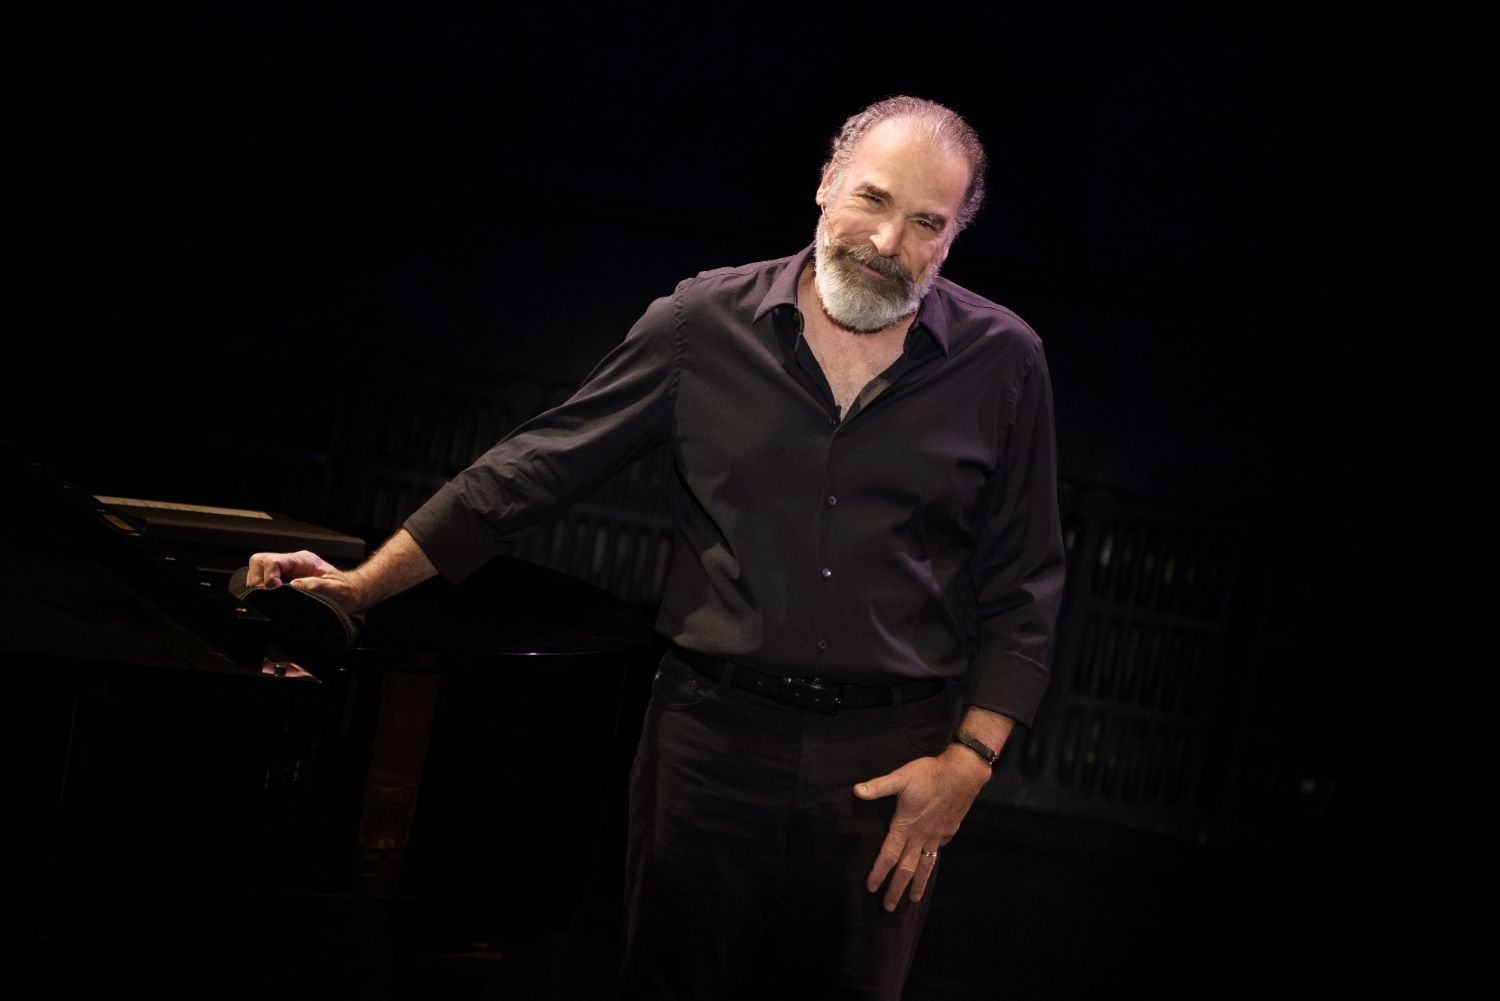 PHOTO: Joan Marcus | The South Pasadenan | Mandy Patinkin on stage in "Being Alive"